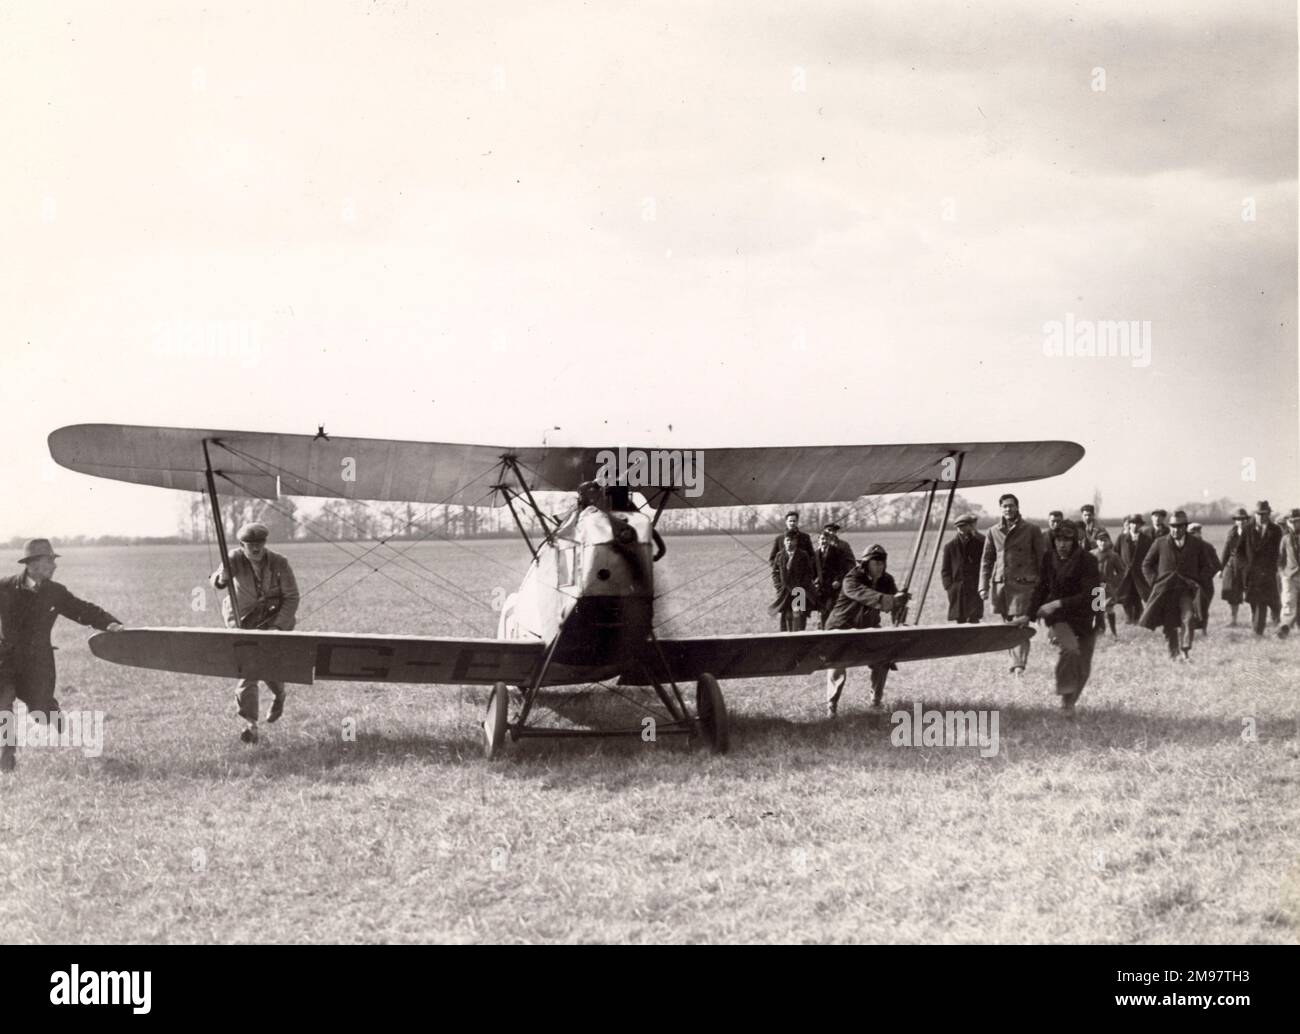 Avro 534 Baby, G-EAUM, with a 60hp ADC Cirrus I air-cooled engine. Stock Photo